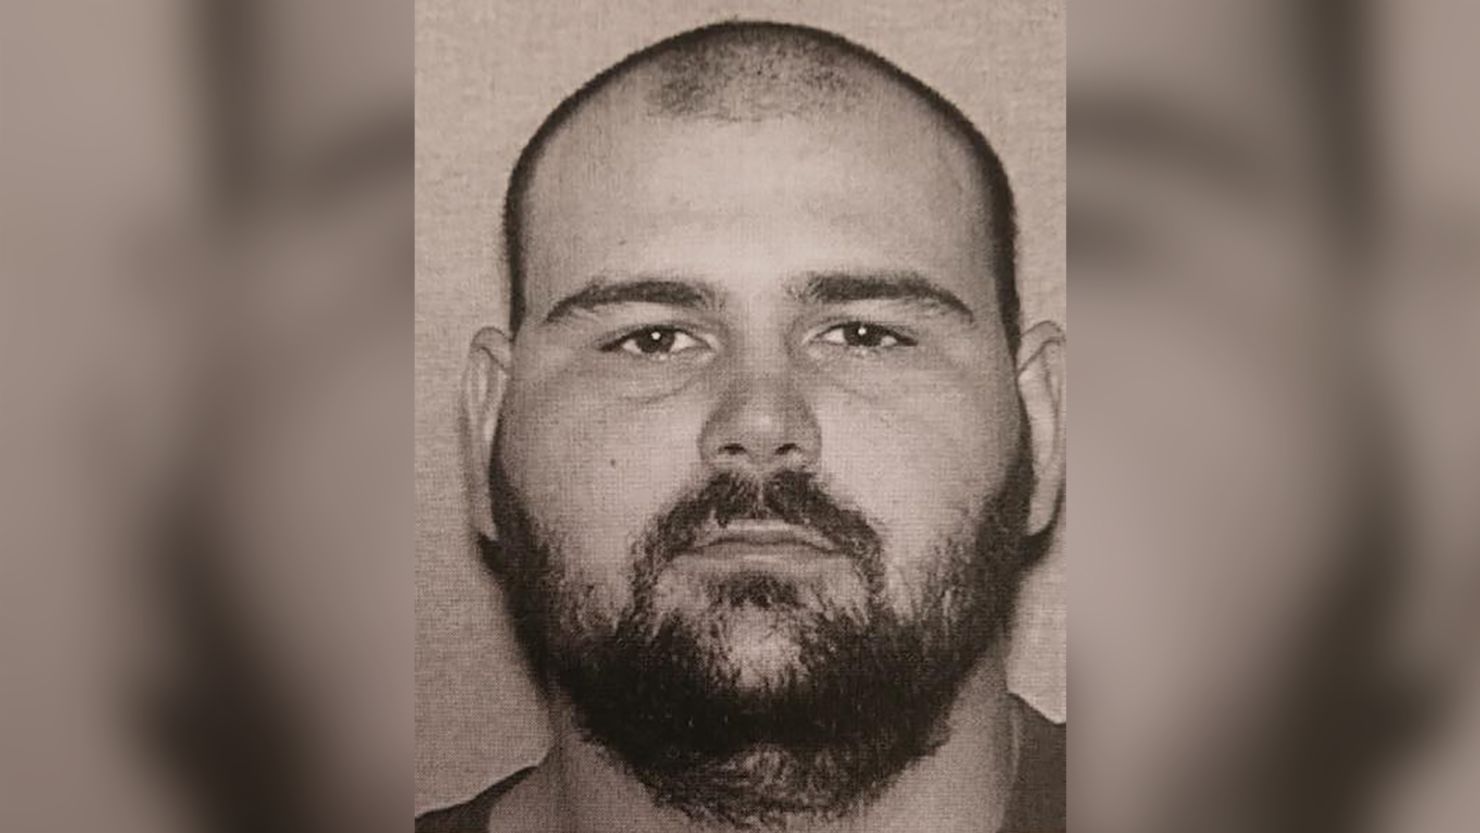 Steven Wiggins is being sought in connection with the fatal shooting of a sheriff's deputy in Tennessee.  